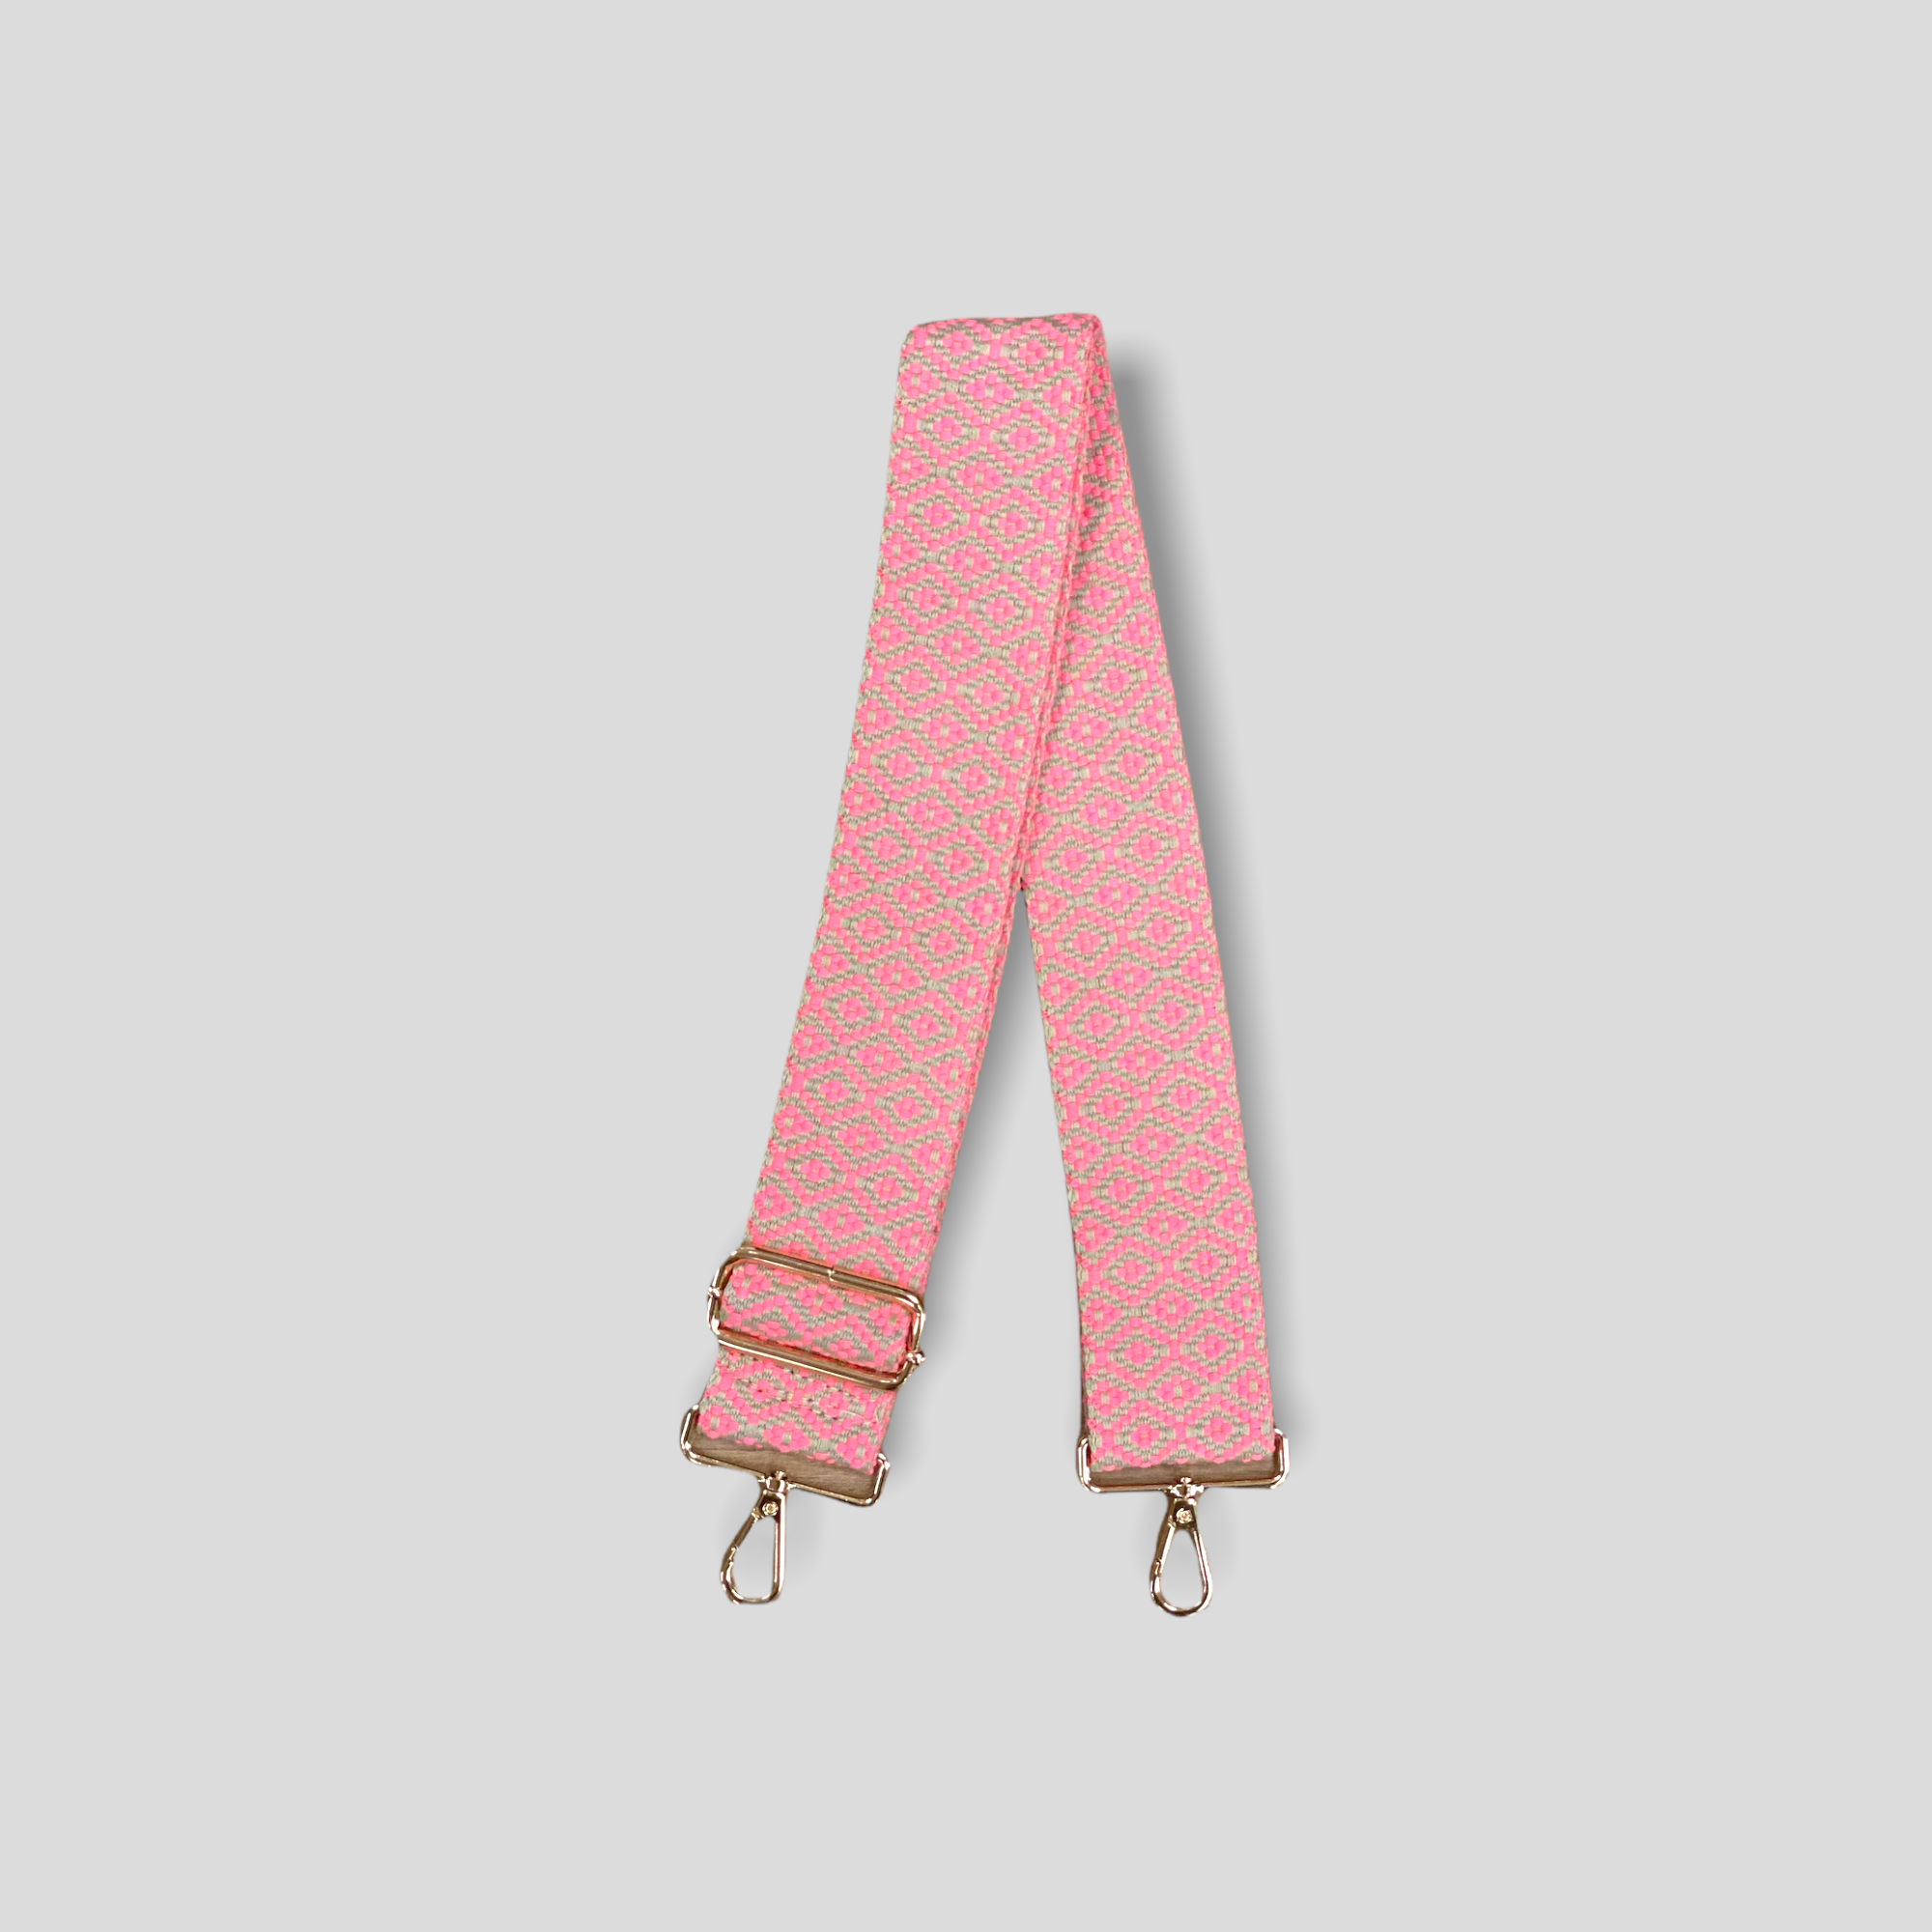 Diamond X Adjustable Bag Strap Pink and Orange - Pepper and Grace